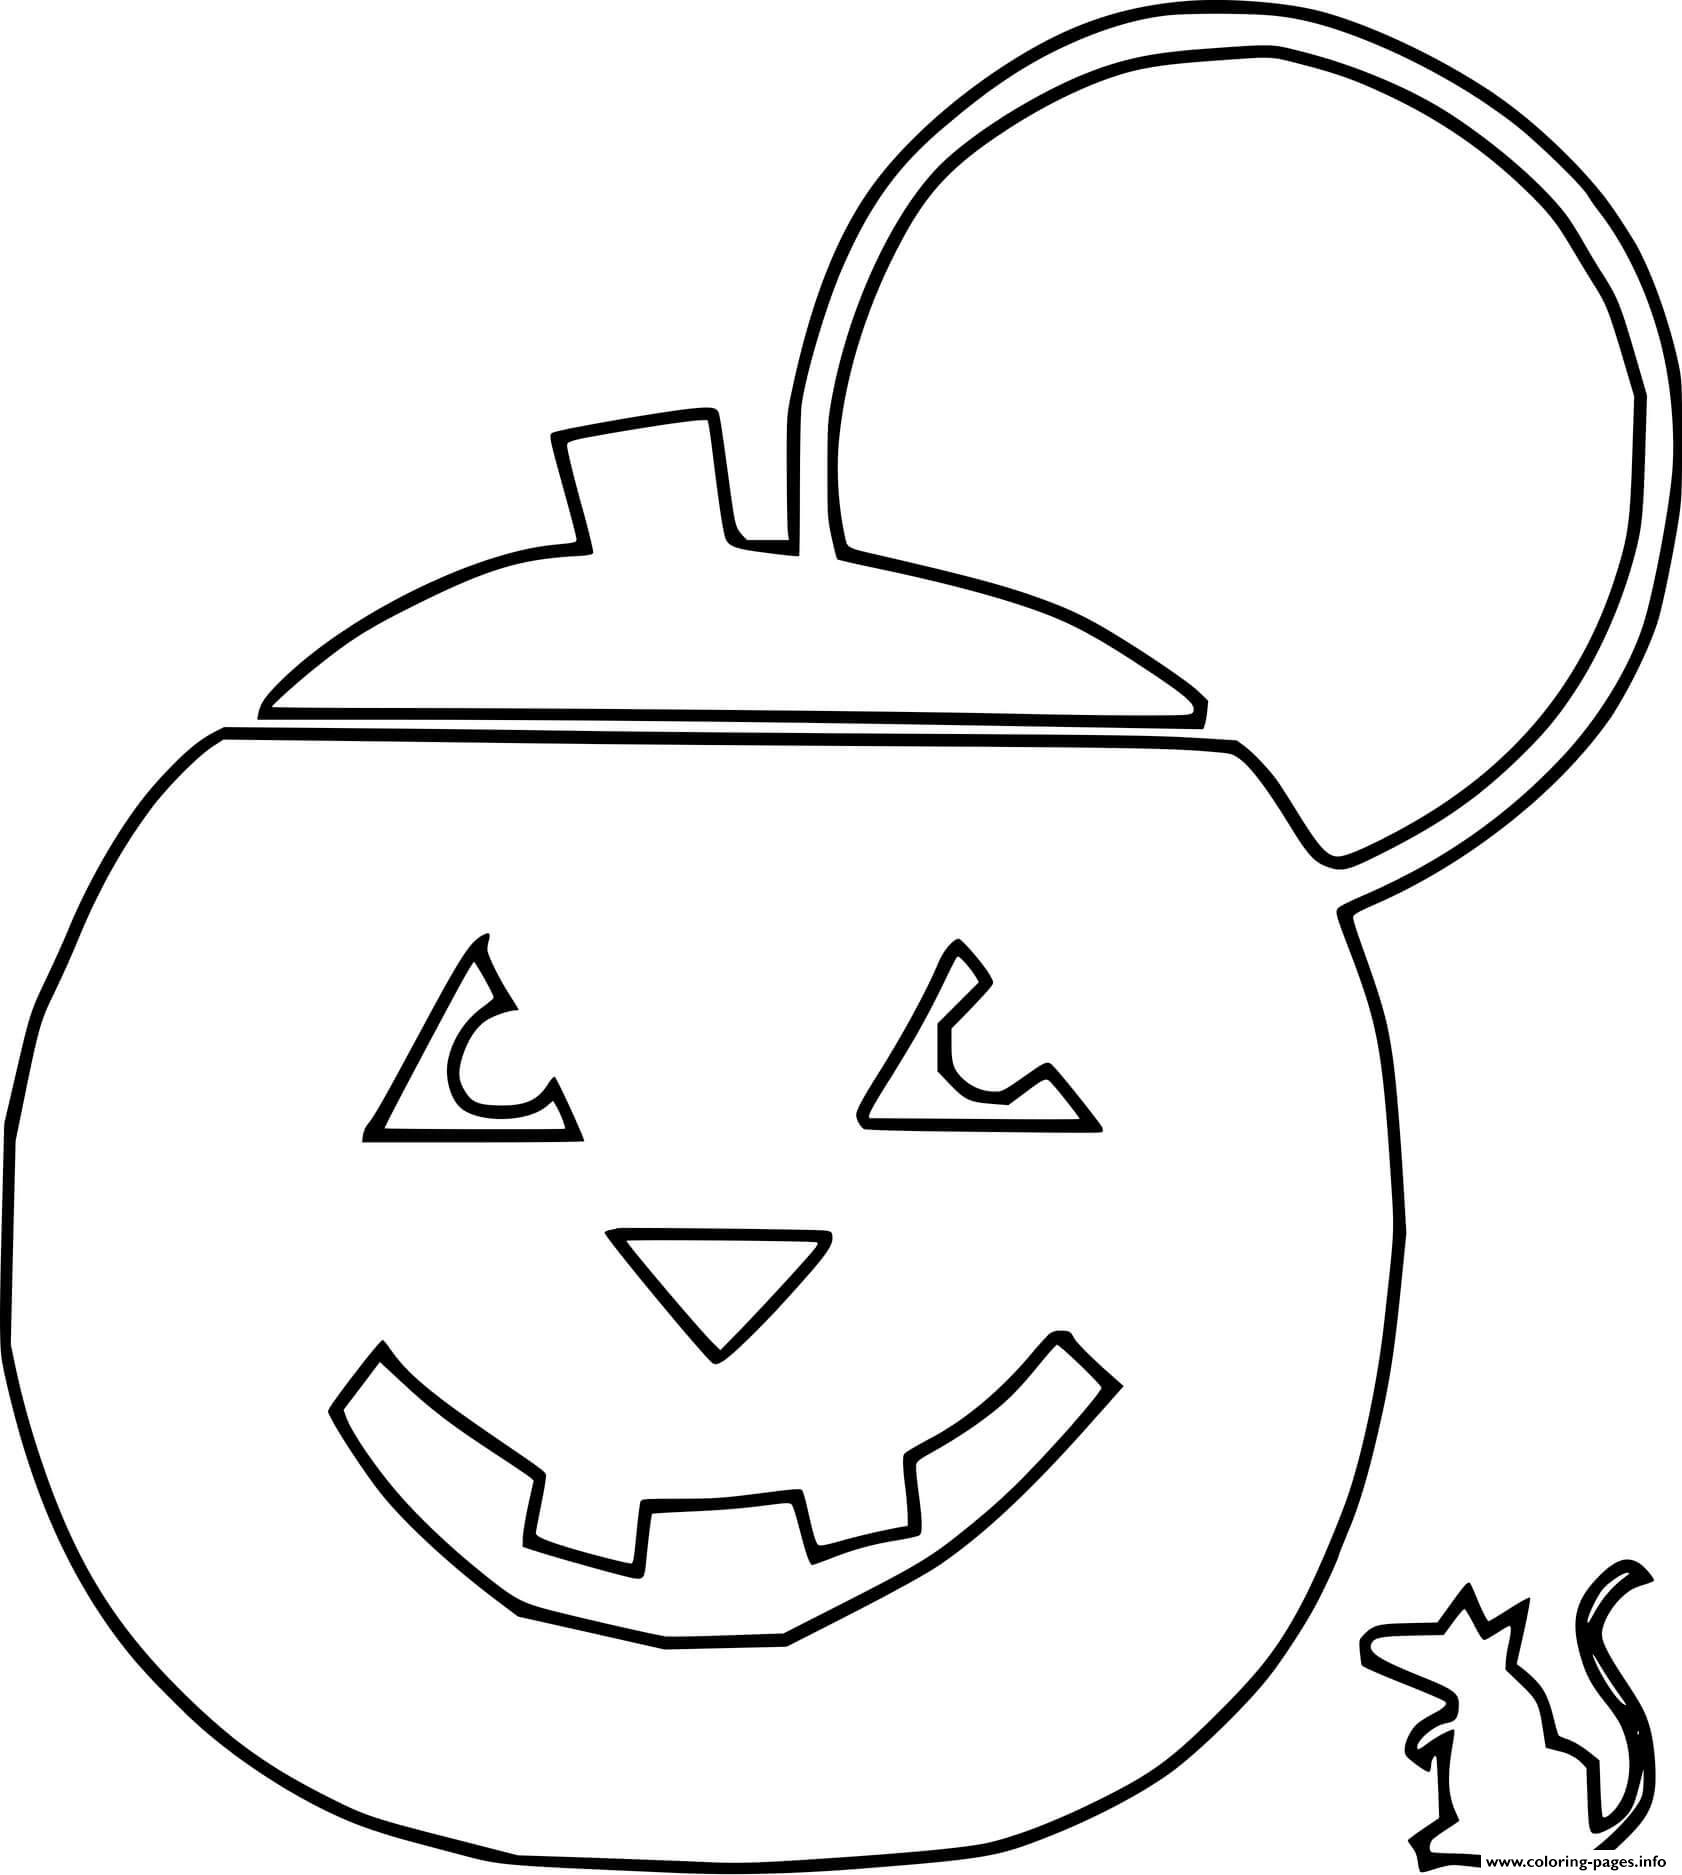 Jack O Lantern Teapot And A Mouse coloring